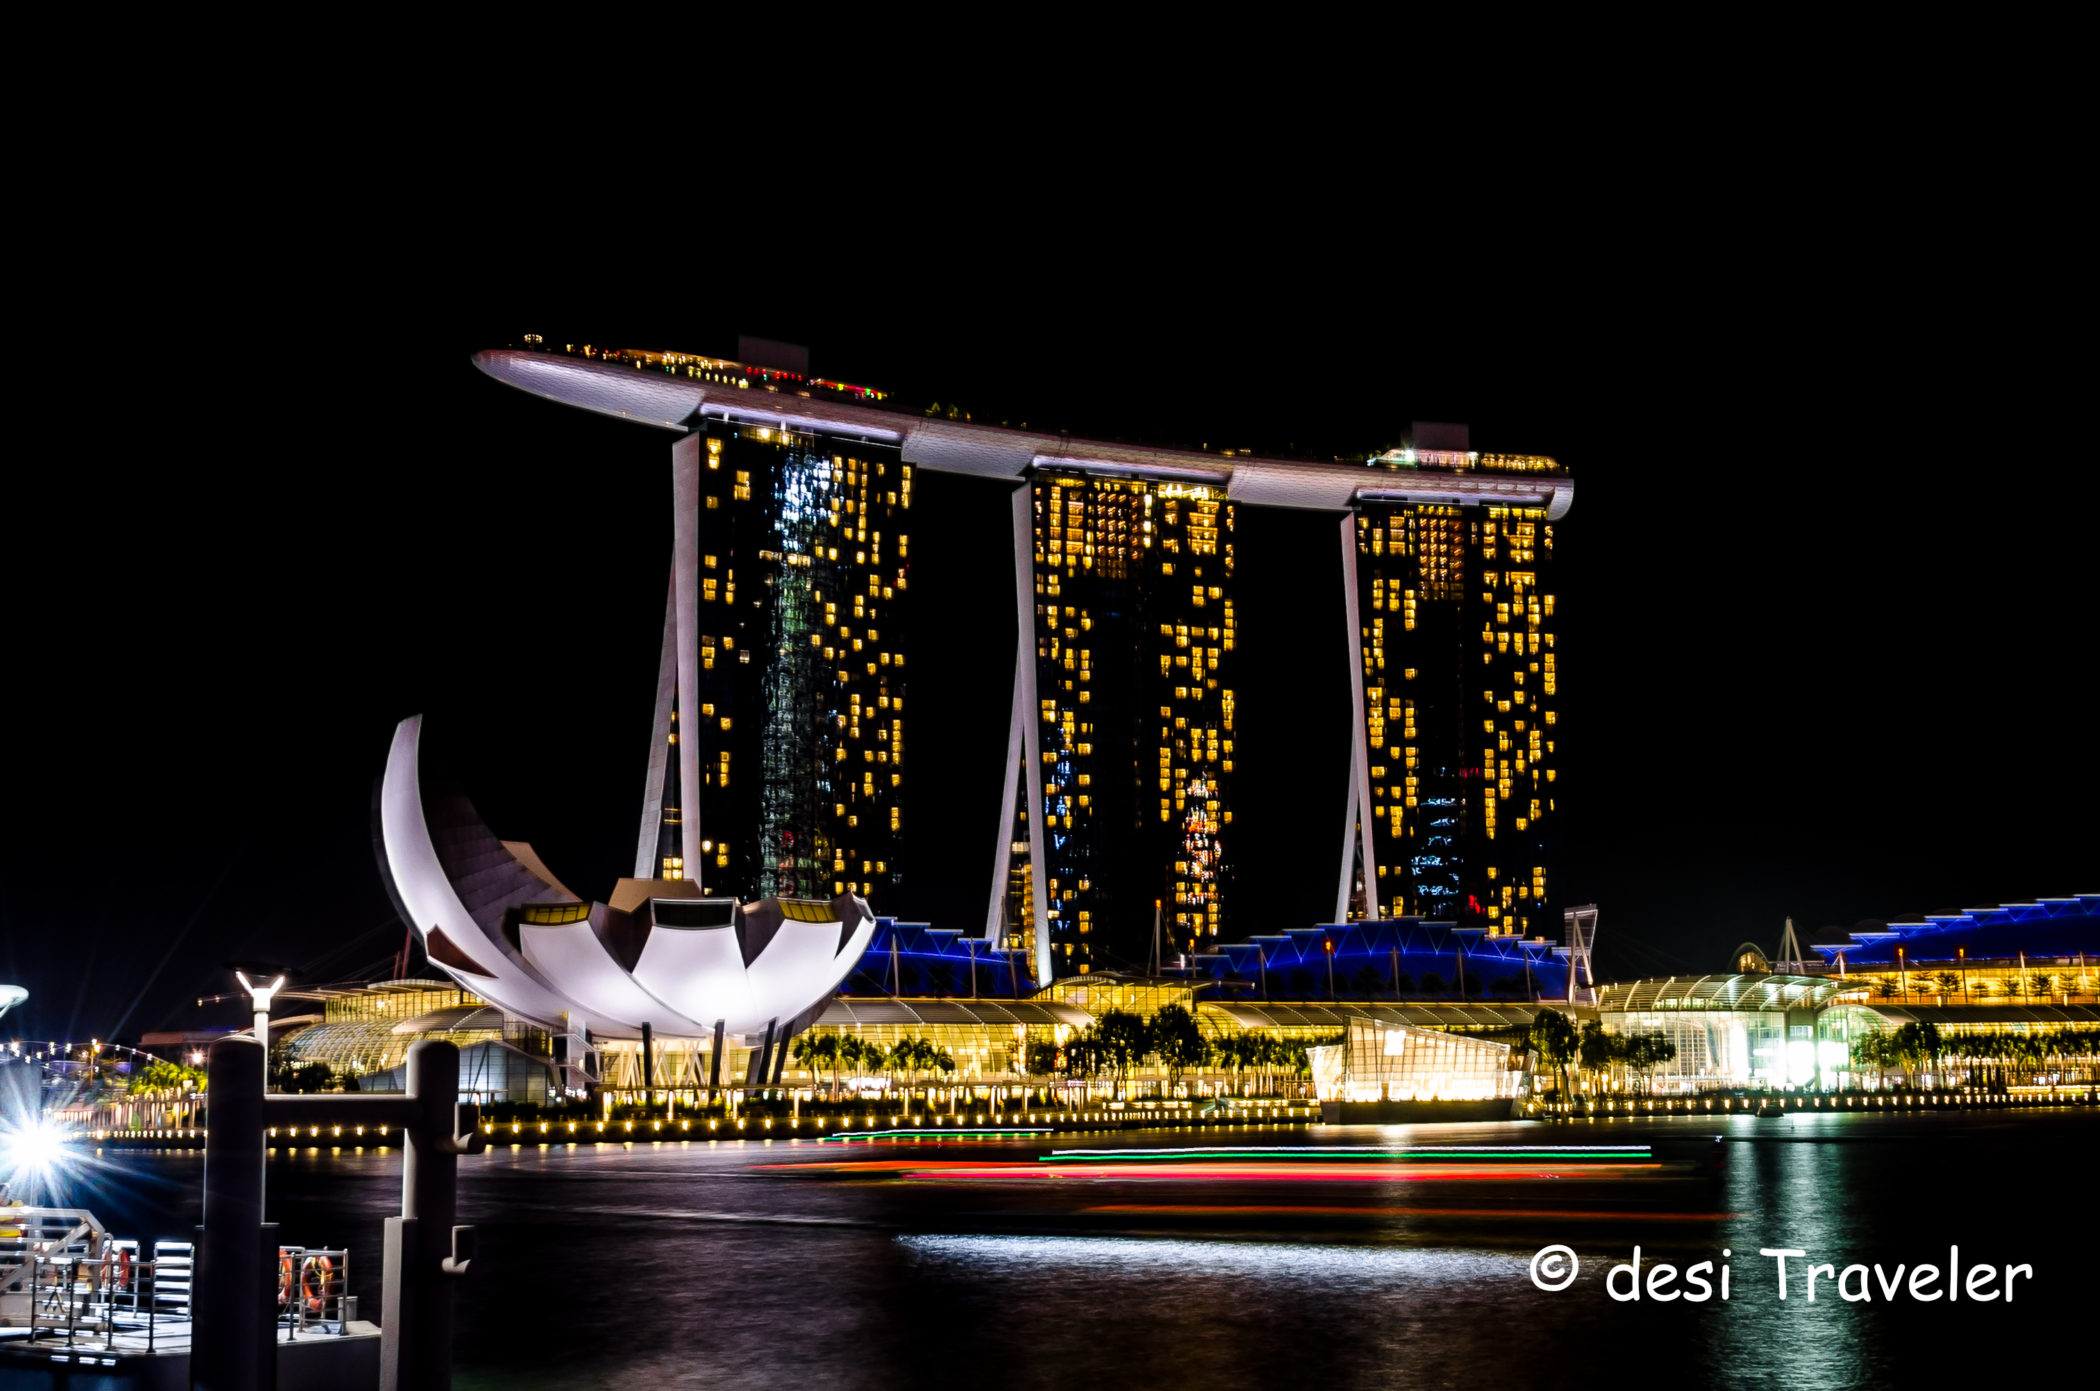 Marina Bay Sands Hotel night picture